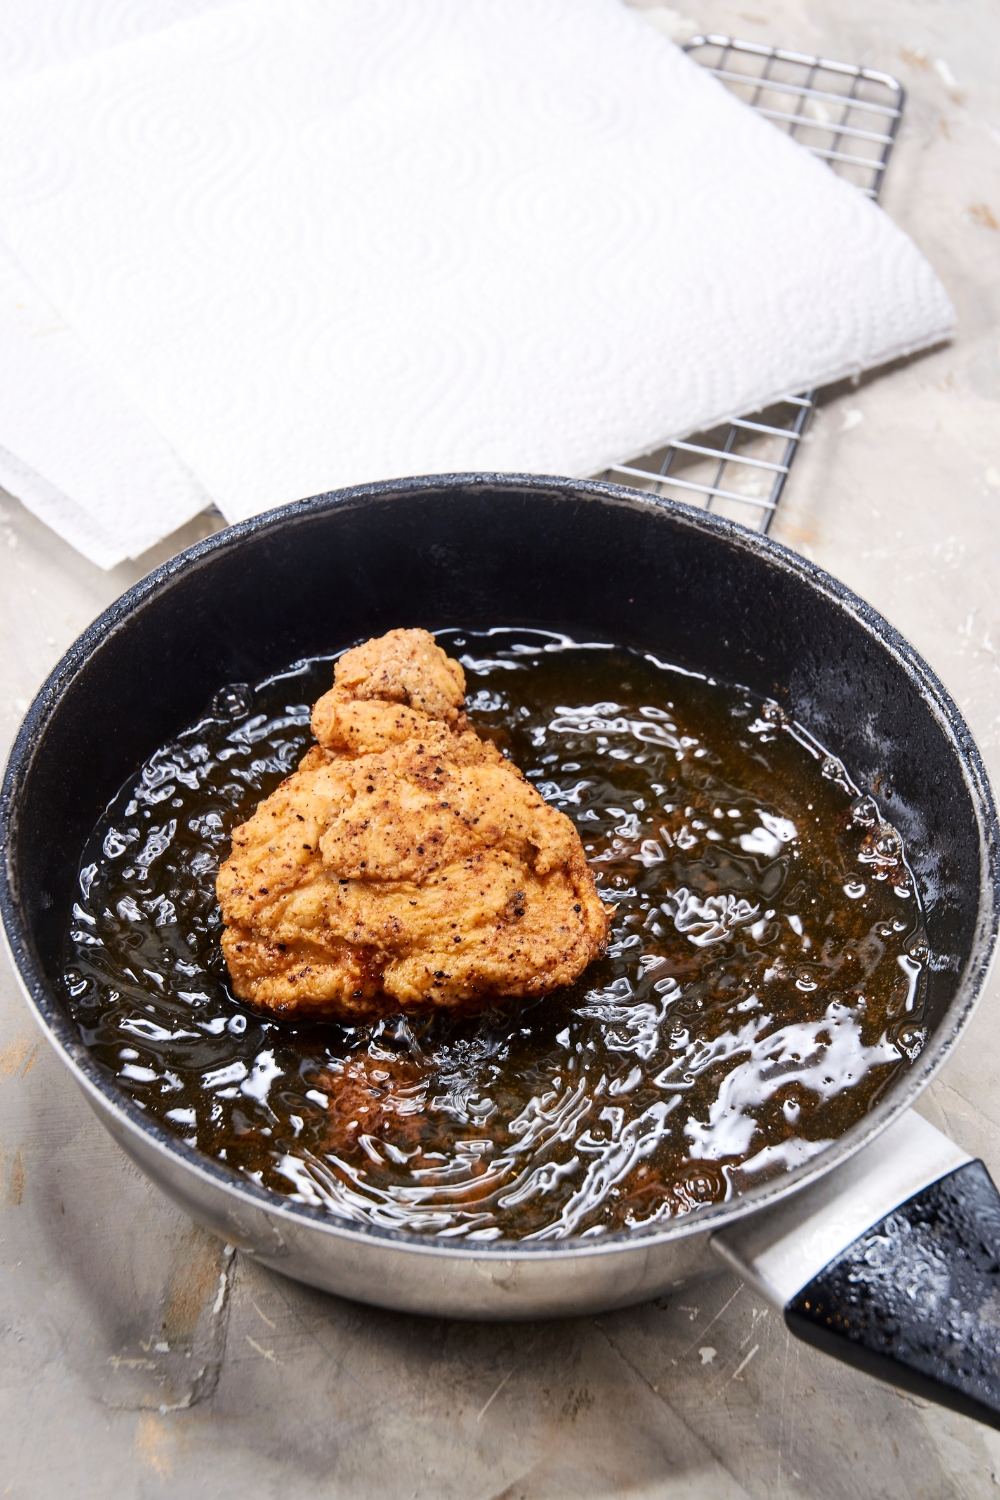 A golden piece of chicken is frying pan full of bubbling oil.